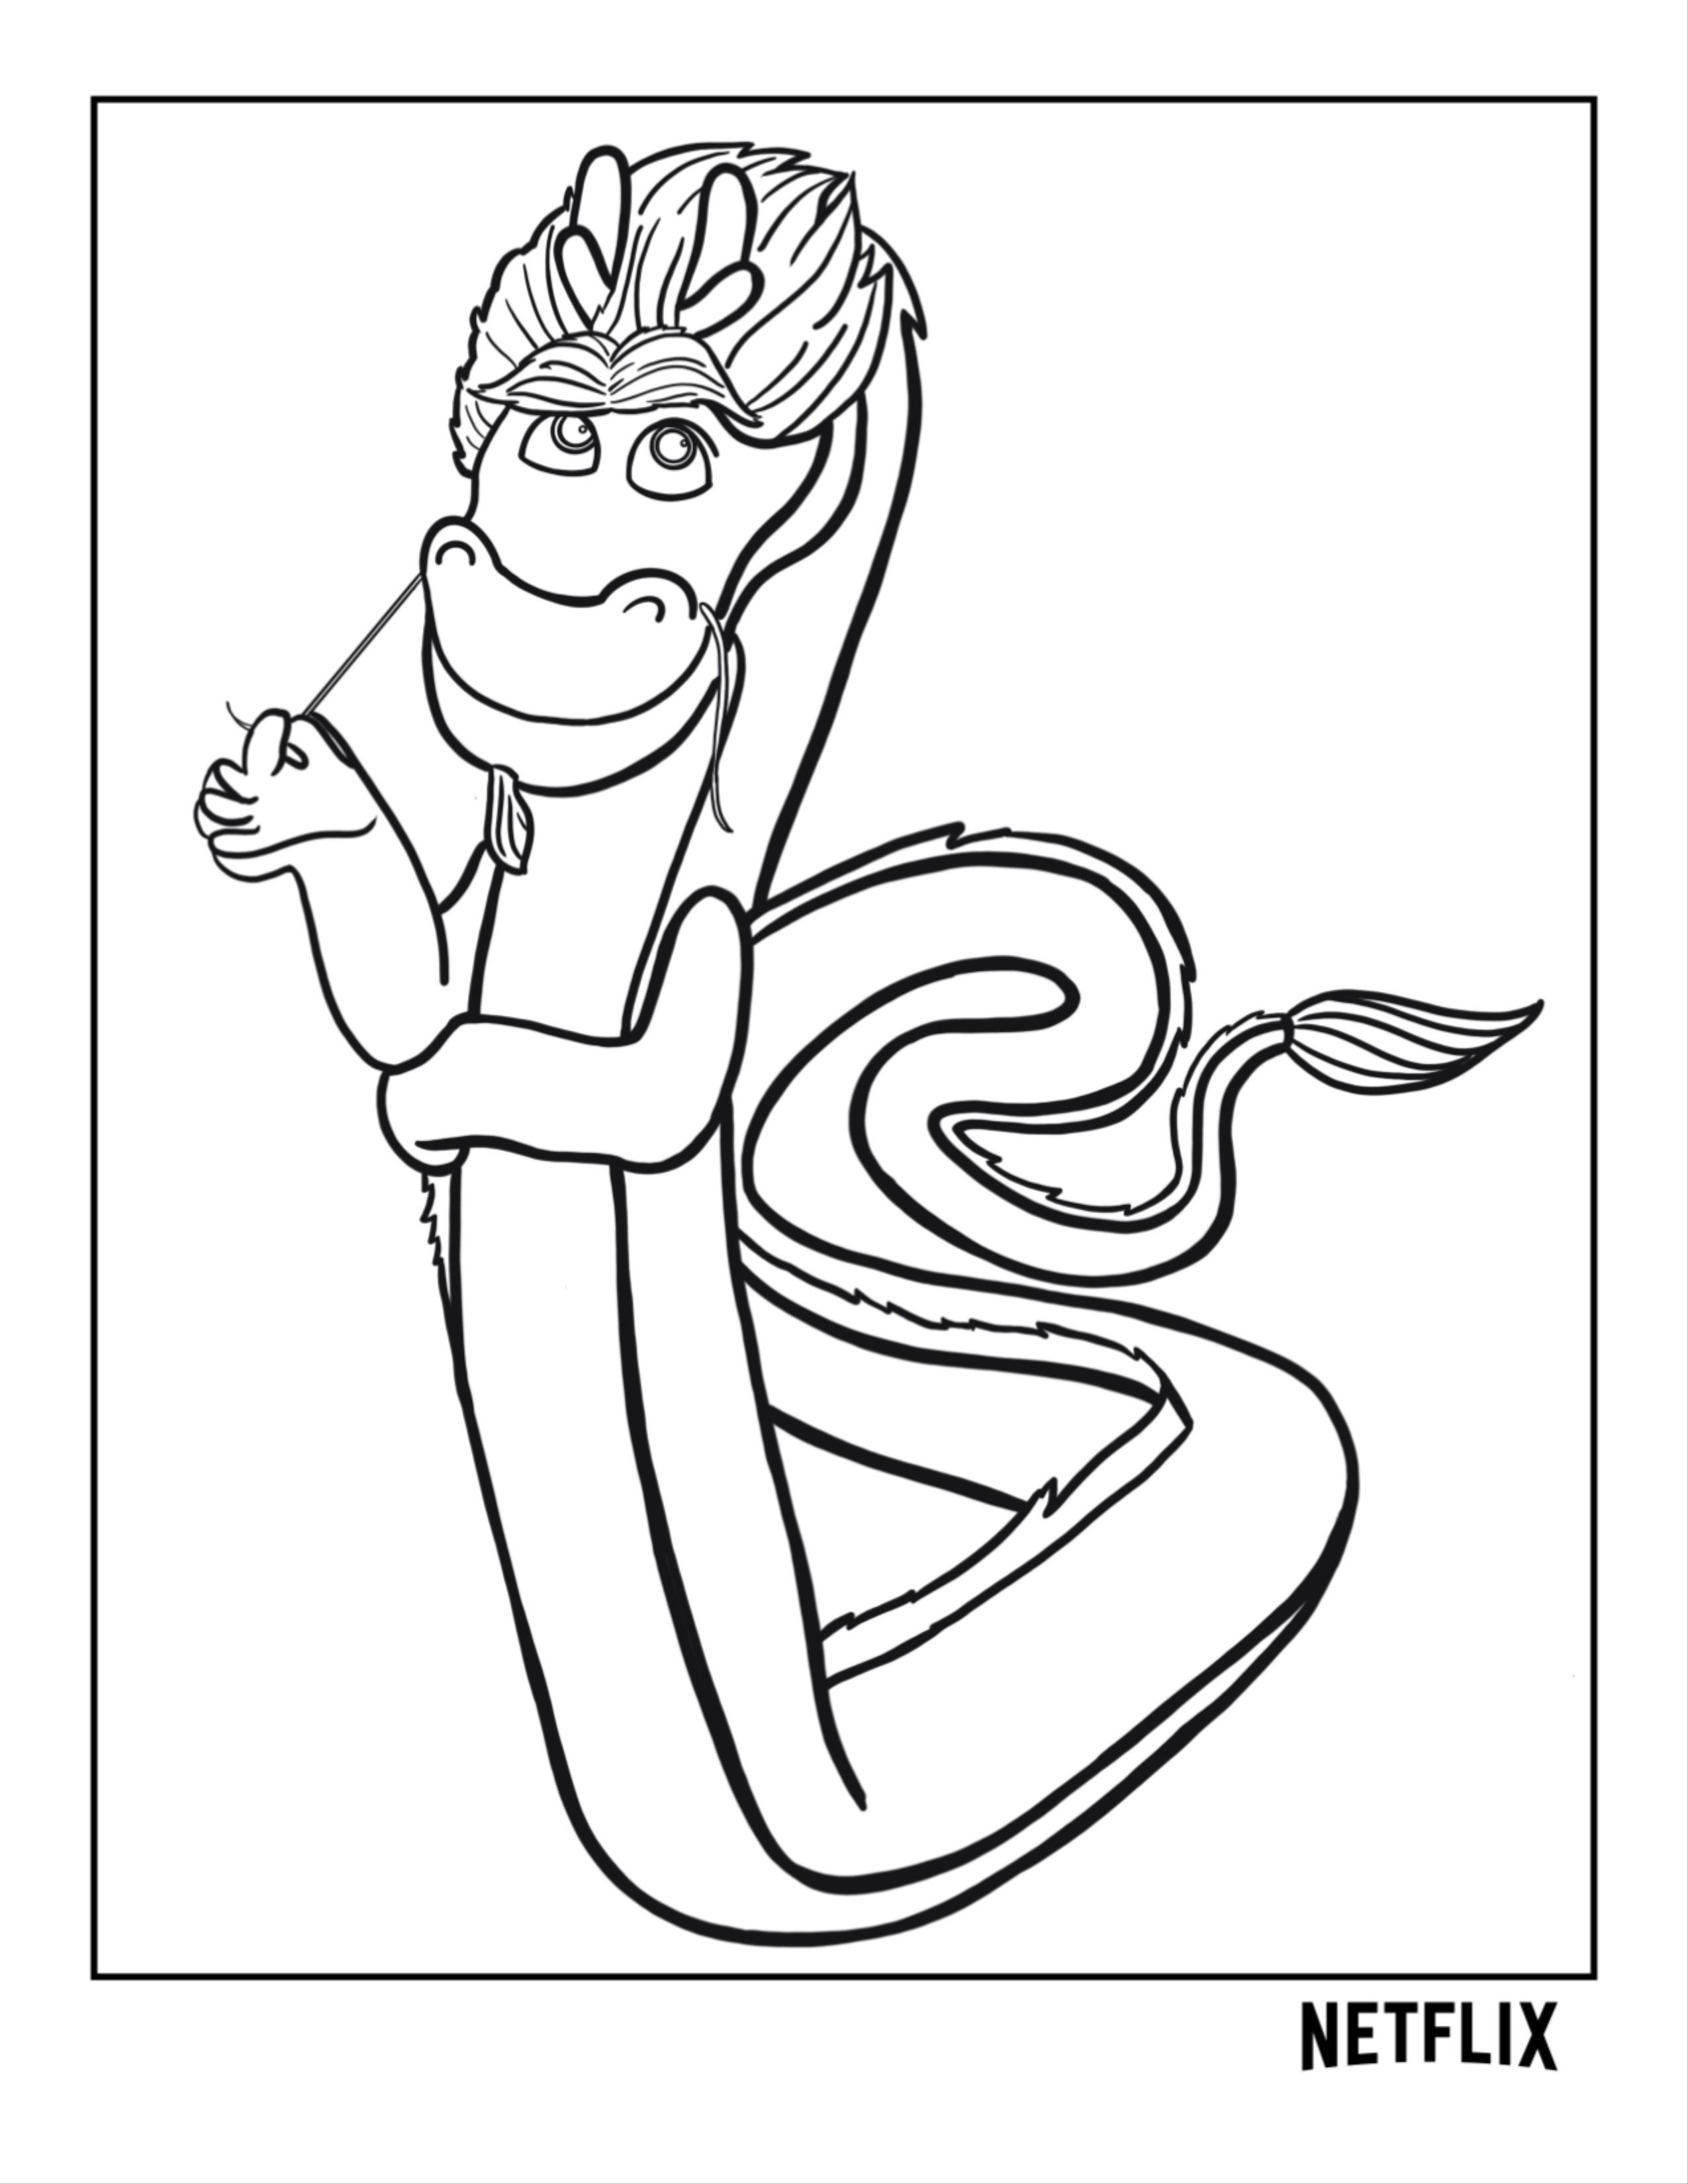 Wish Dragon Coloring Pages | Dragon coloring page, Dragon movies, Coloring  pages